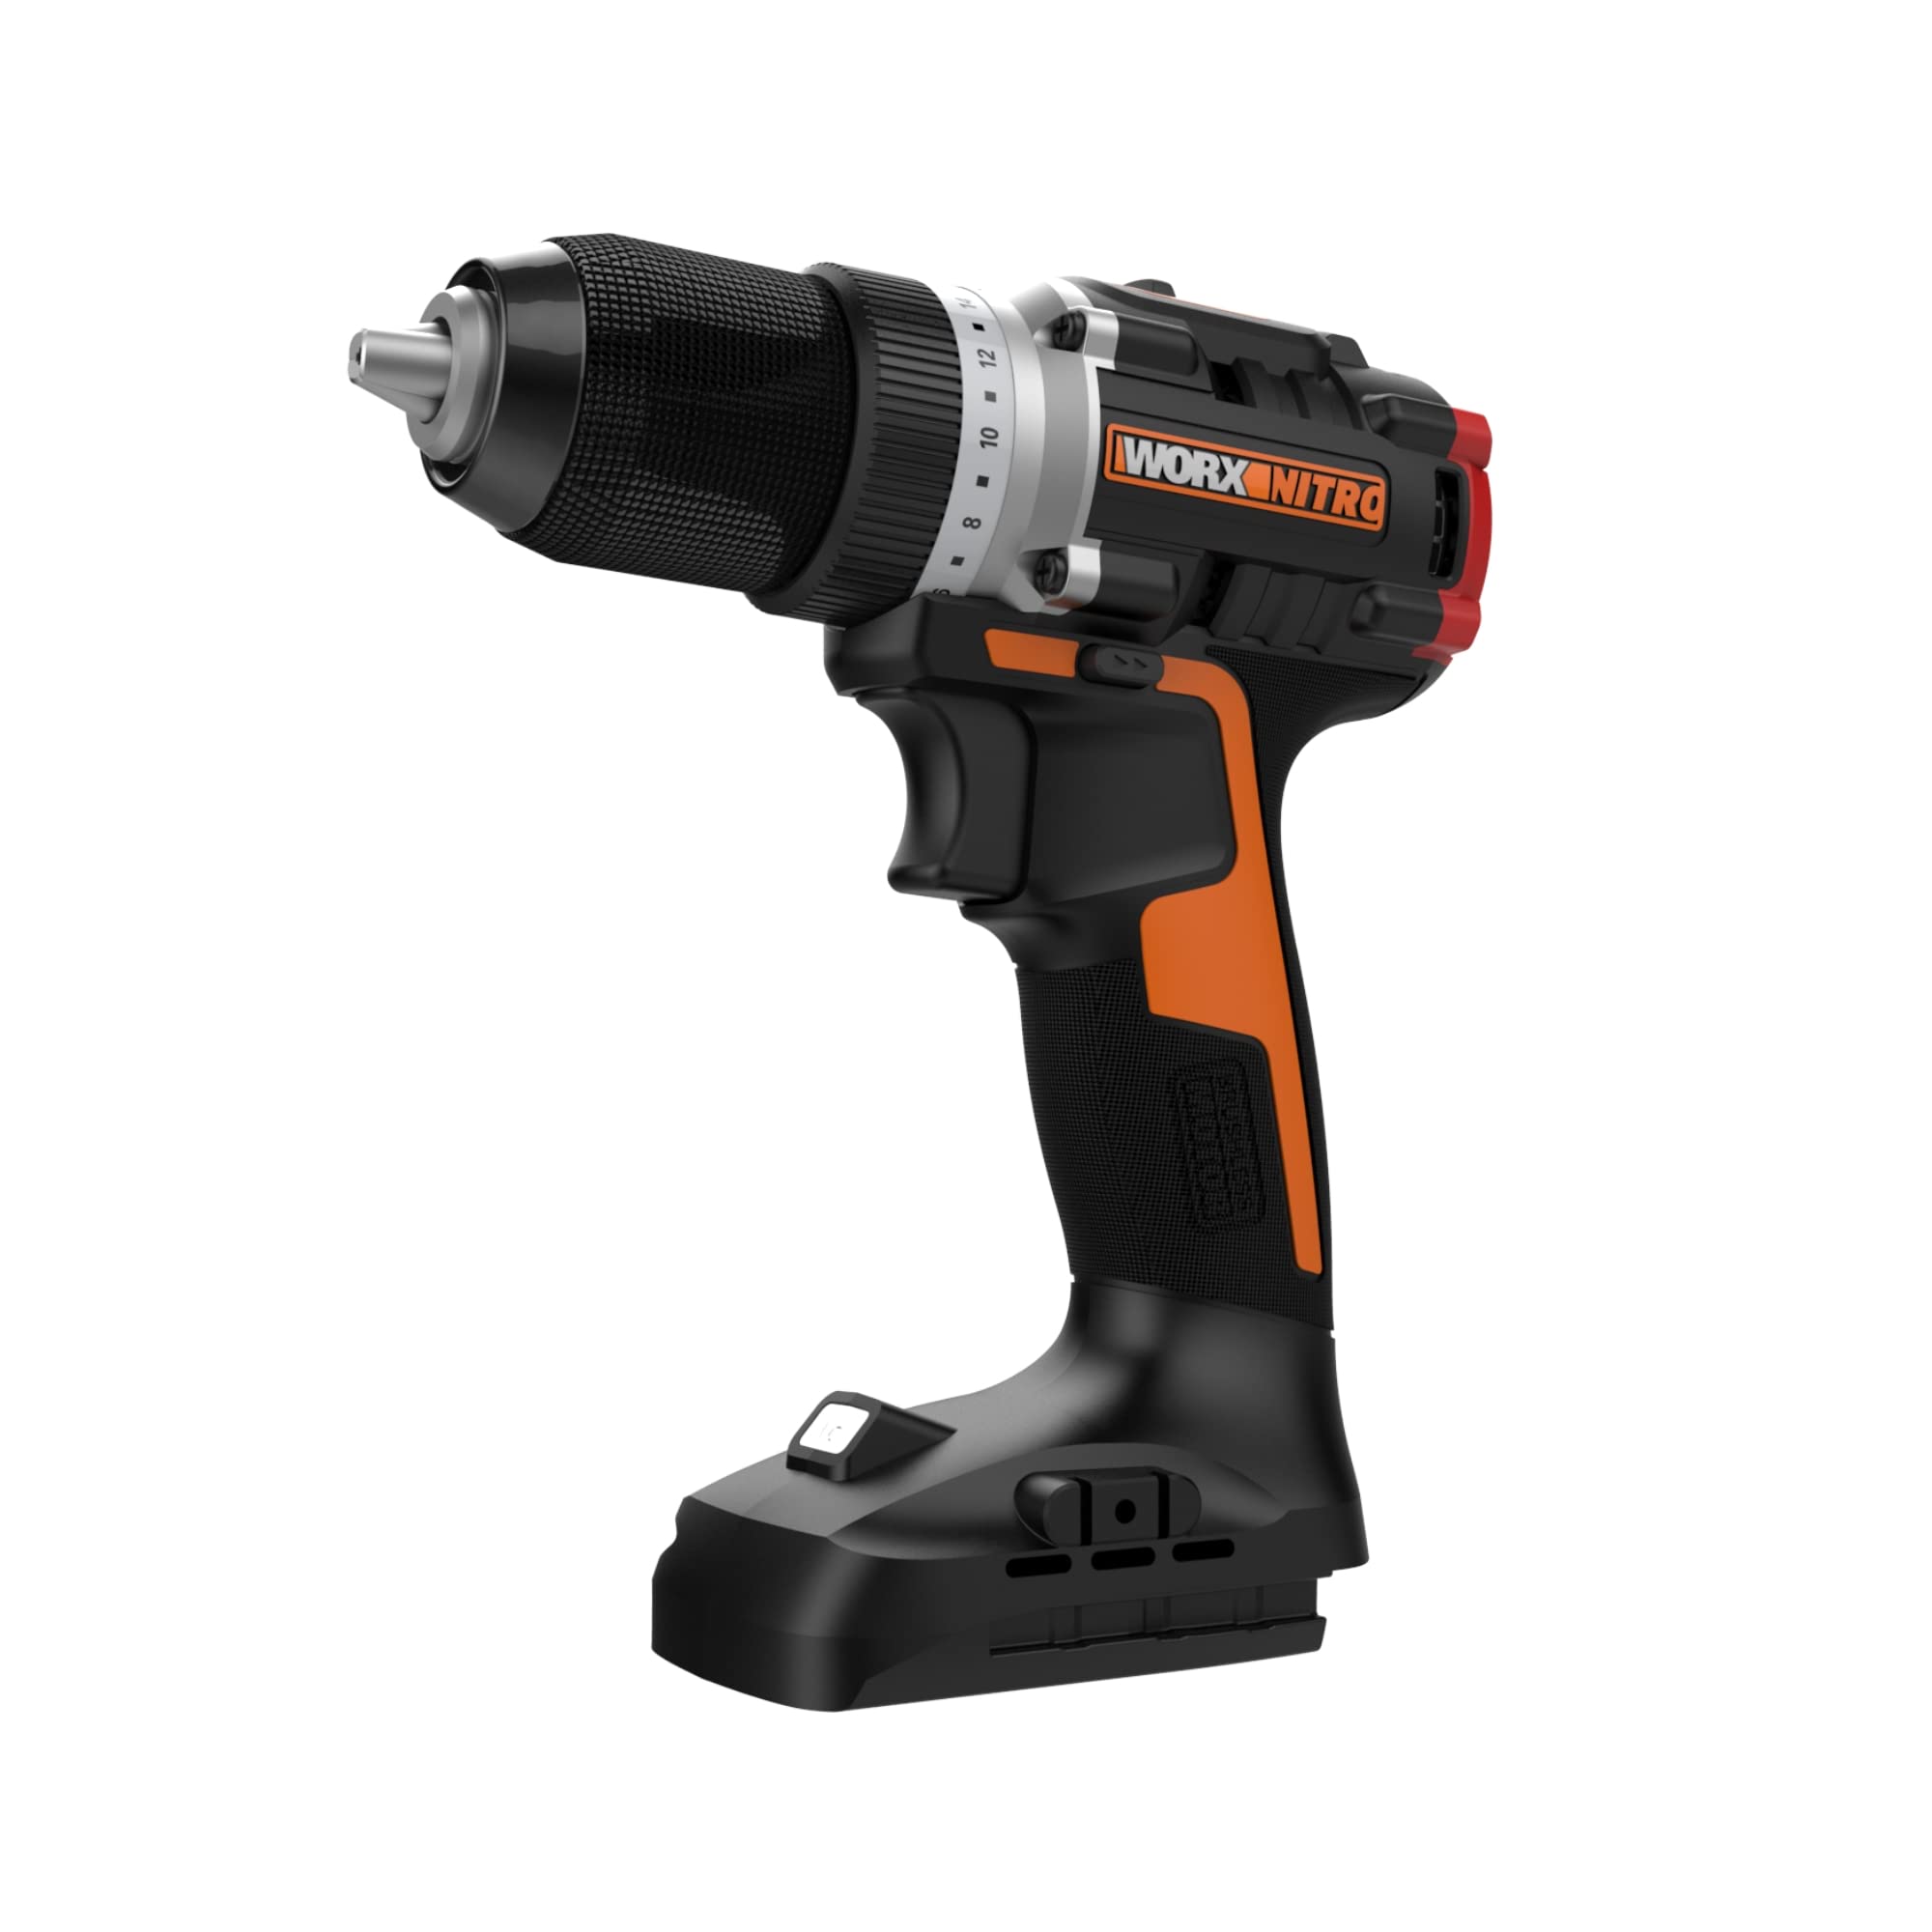 Worx Nitro 20V Compact Brushless 1/2” Drill/Driver - Tool Only WX130L.9